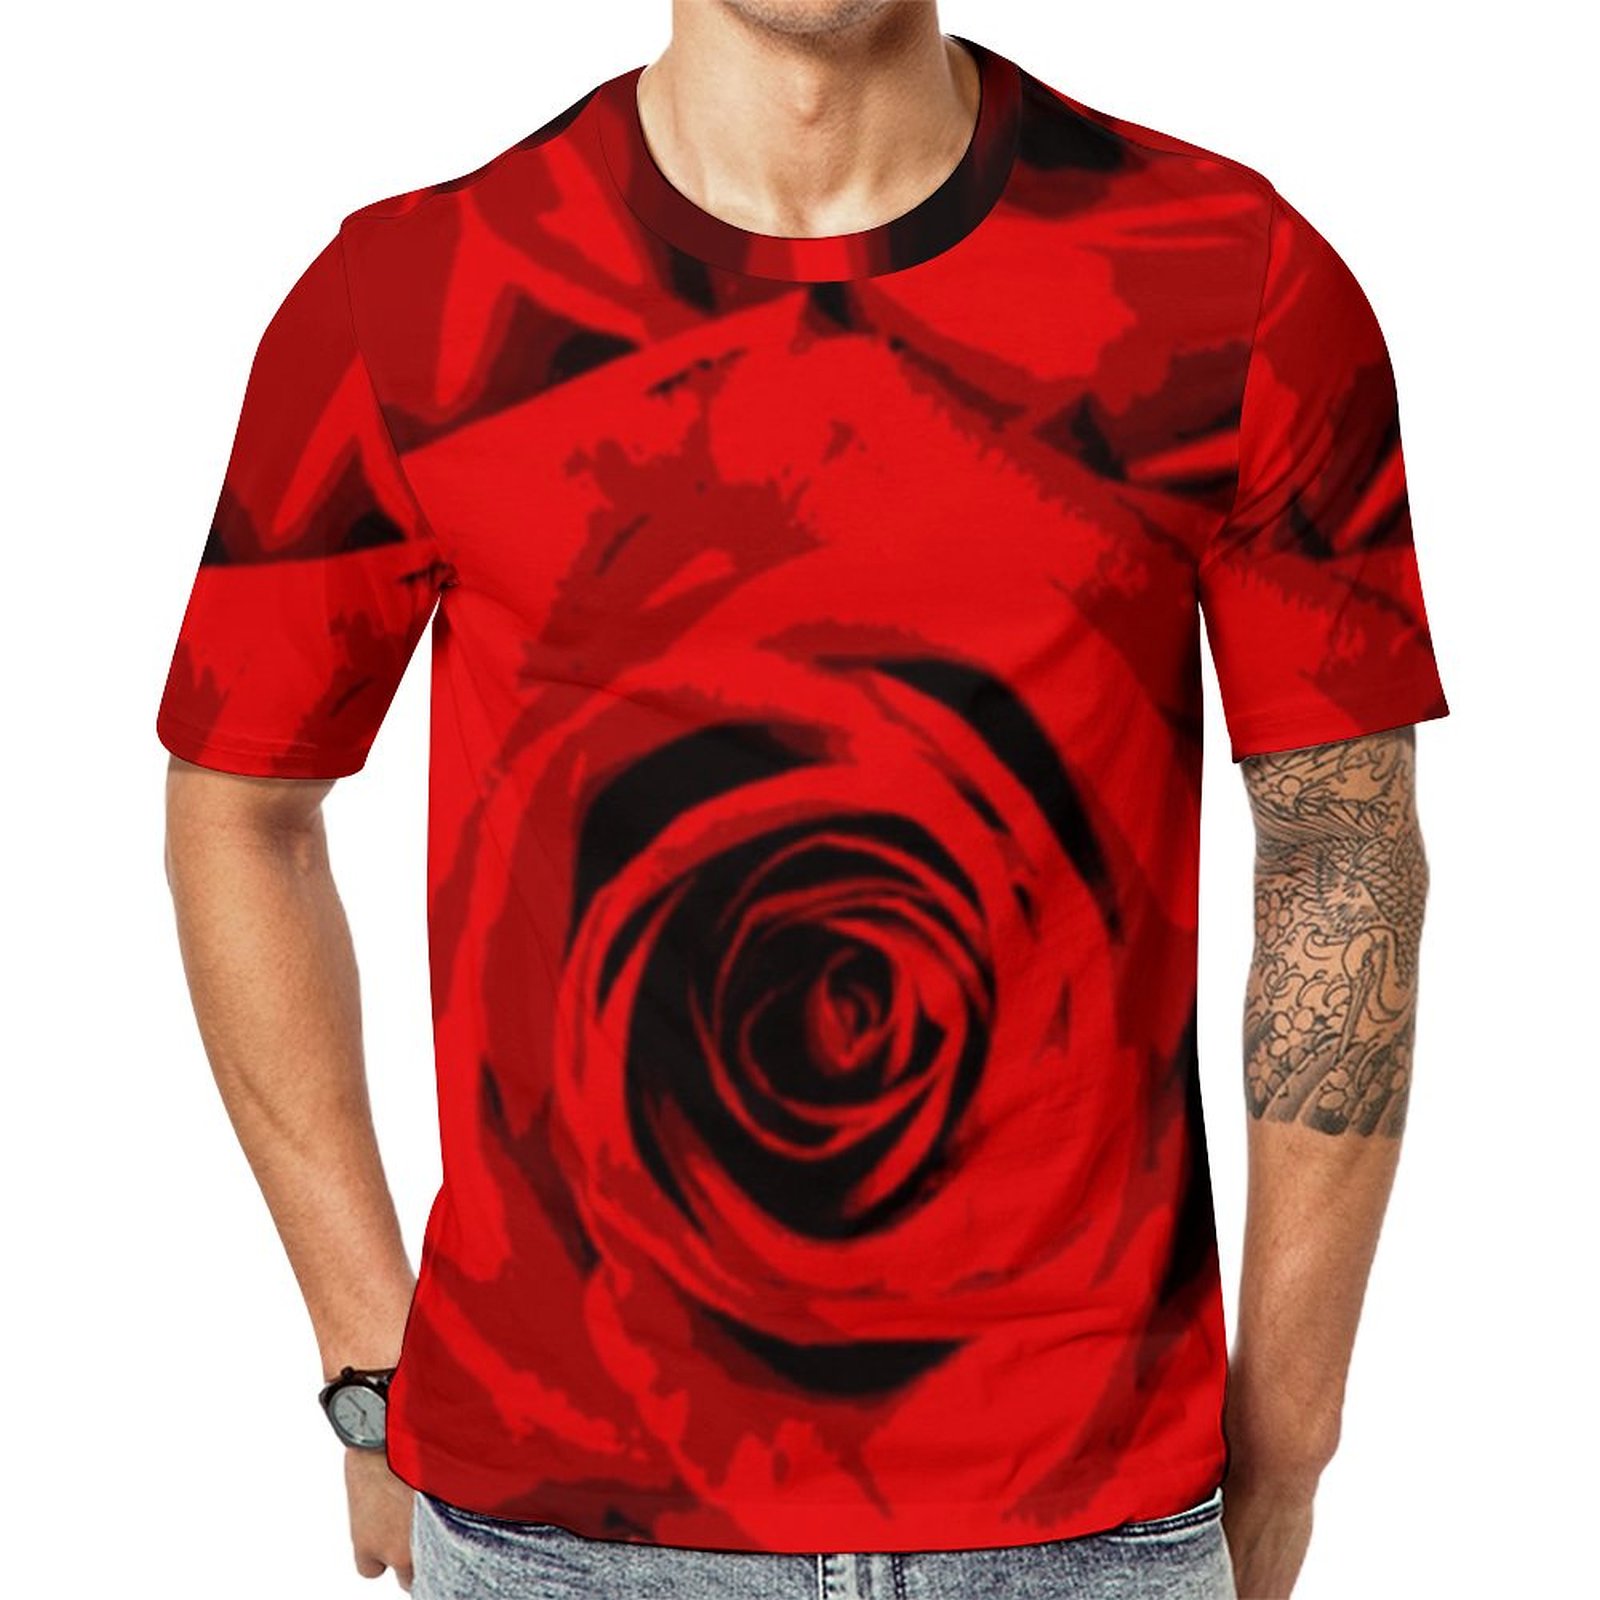 Red Rose With Black Print All Over Short Sleeve Print Unisex Tshirt Summer Casual Tees for Men and Women Coolcoshirts